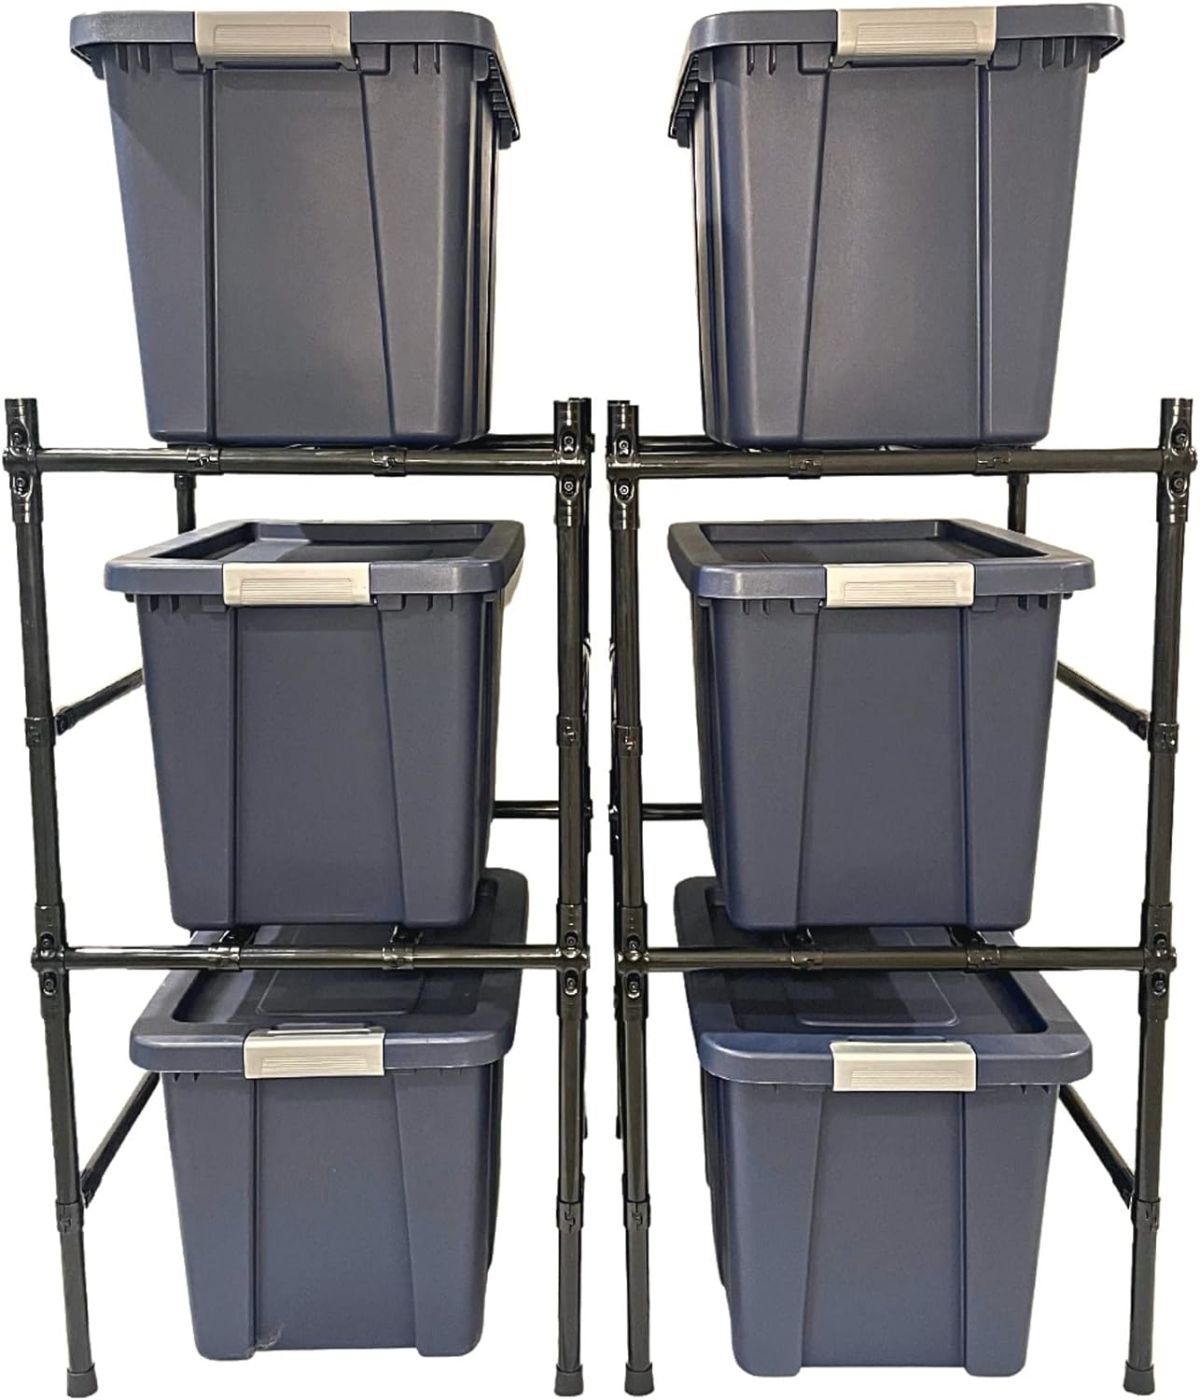 Tote Storage Shelving System That Adapts to Any Space